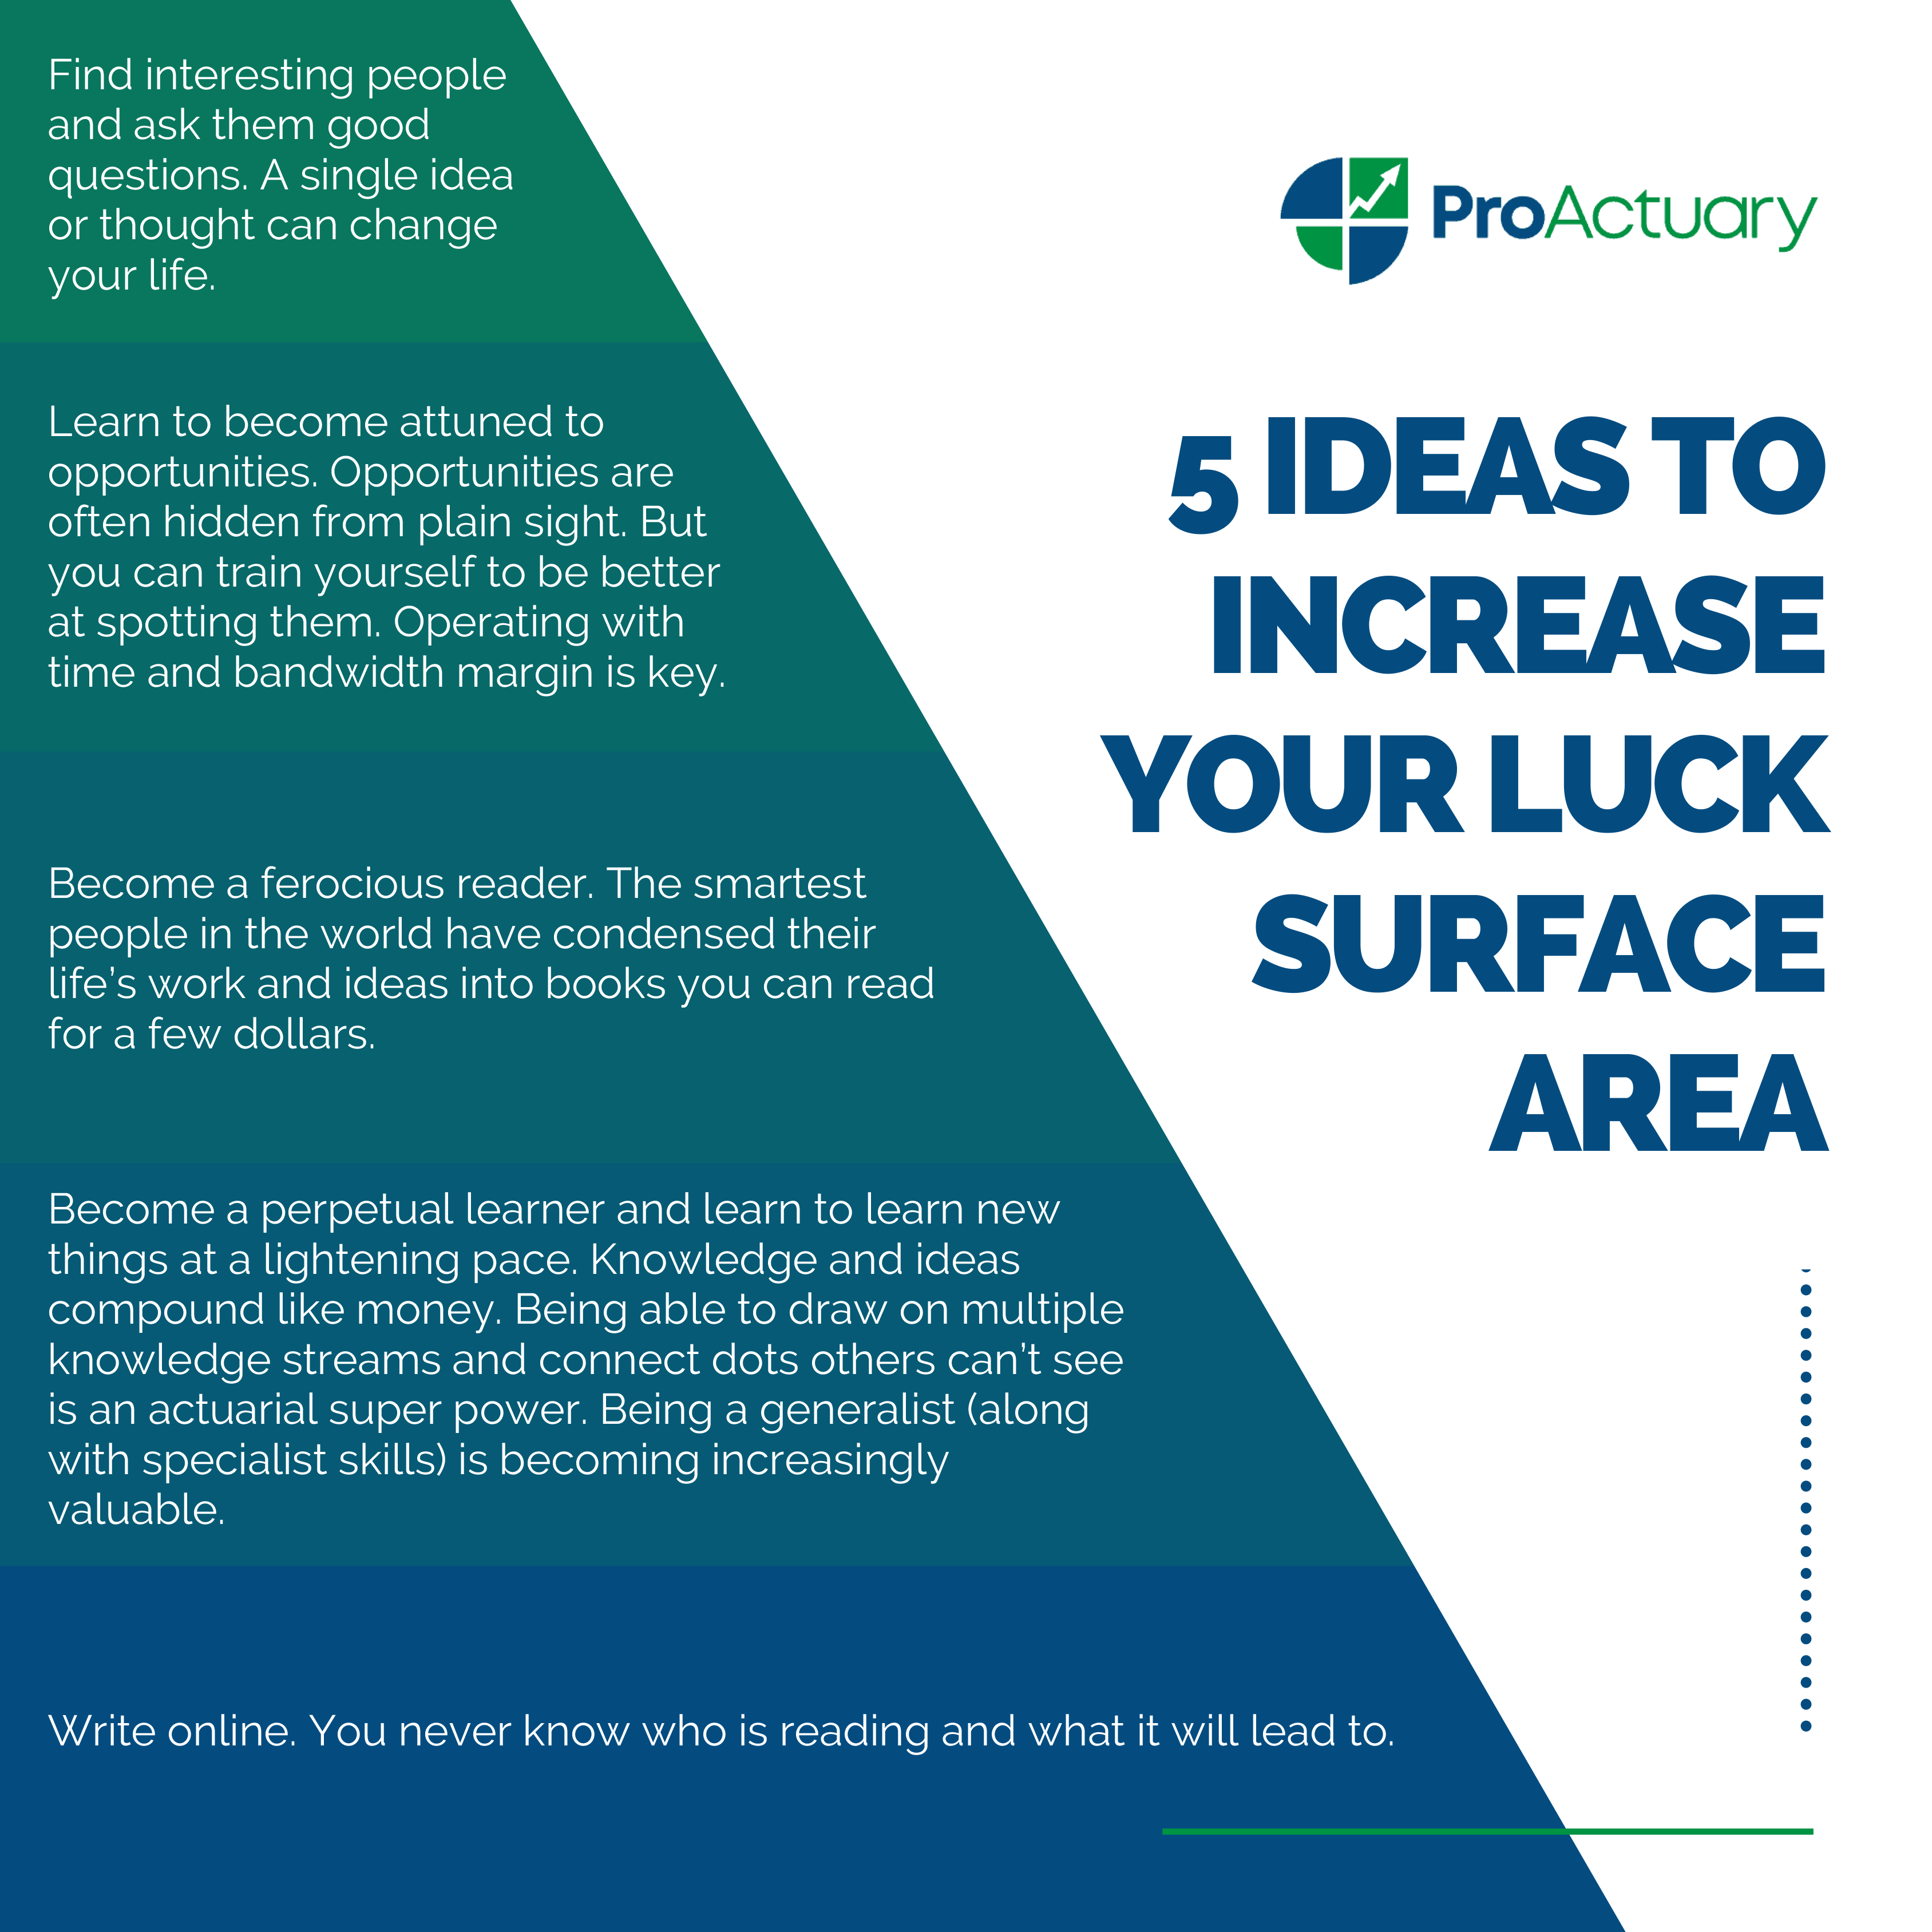 Ideas to Increase Your Luck Surface Area